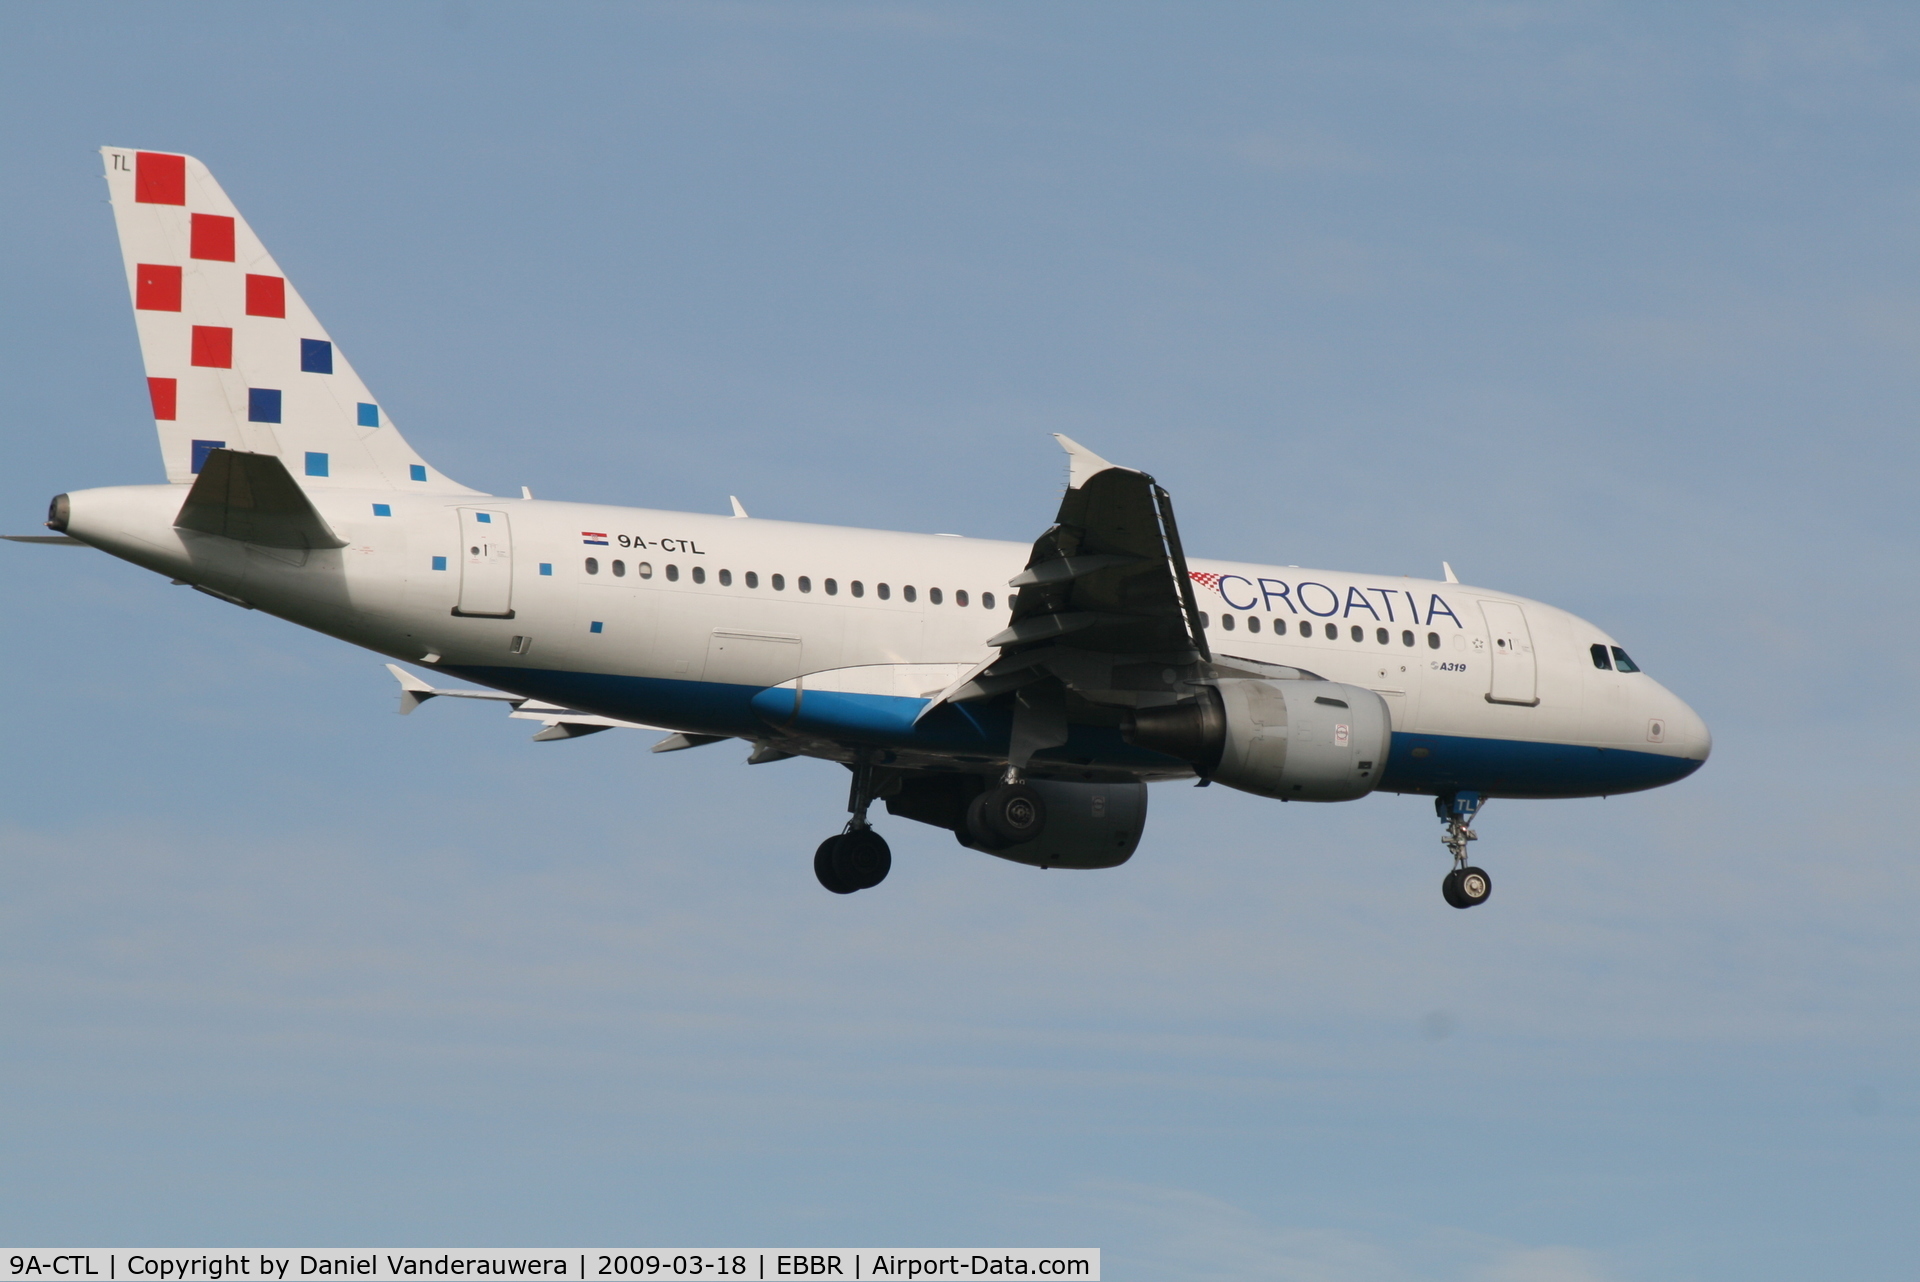 9A-CTL, 2000 Airbus A319-112 C/N 1252, Flight OU456 is descending to RWY 02